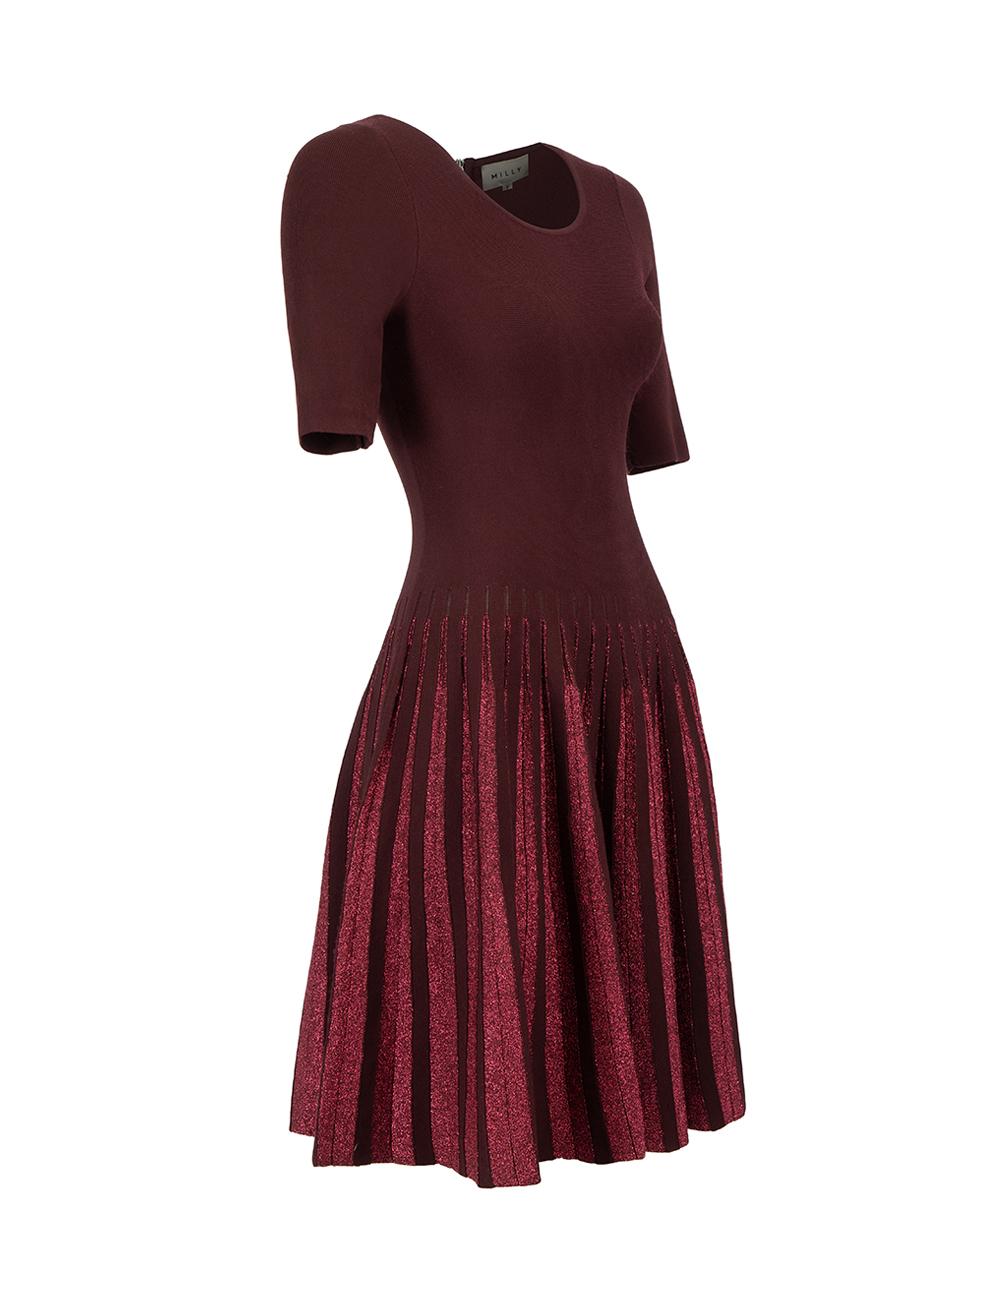 CONDITION is Very good. Minimal wear to dress is evident. Minor pilling over all material on this used Milly designer resale item. 



Details


Burgundy

Synthetic

Mini dress

Round neckline

Pleated skirt with metallic threading

Back zip closure